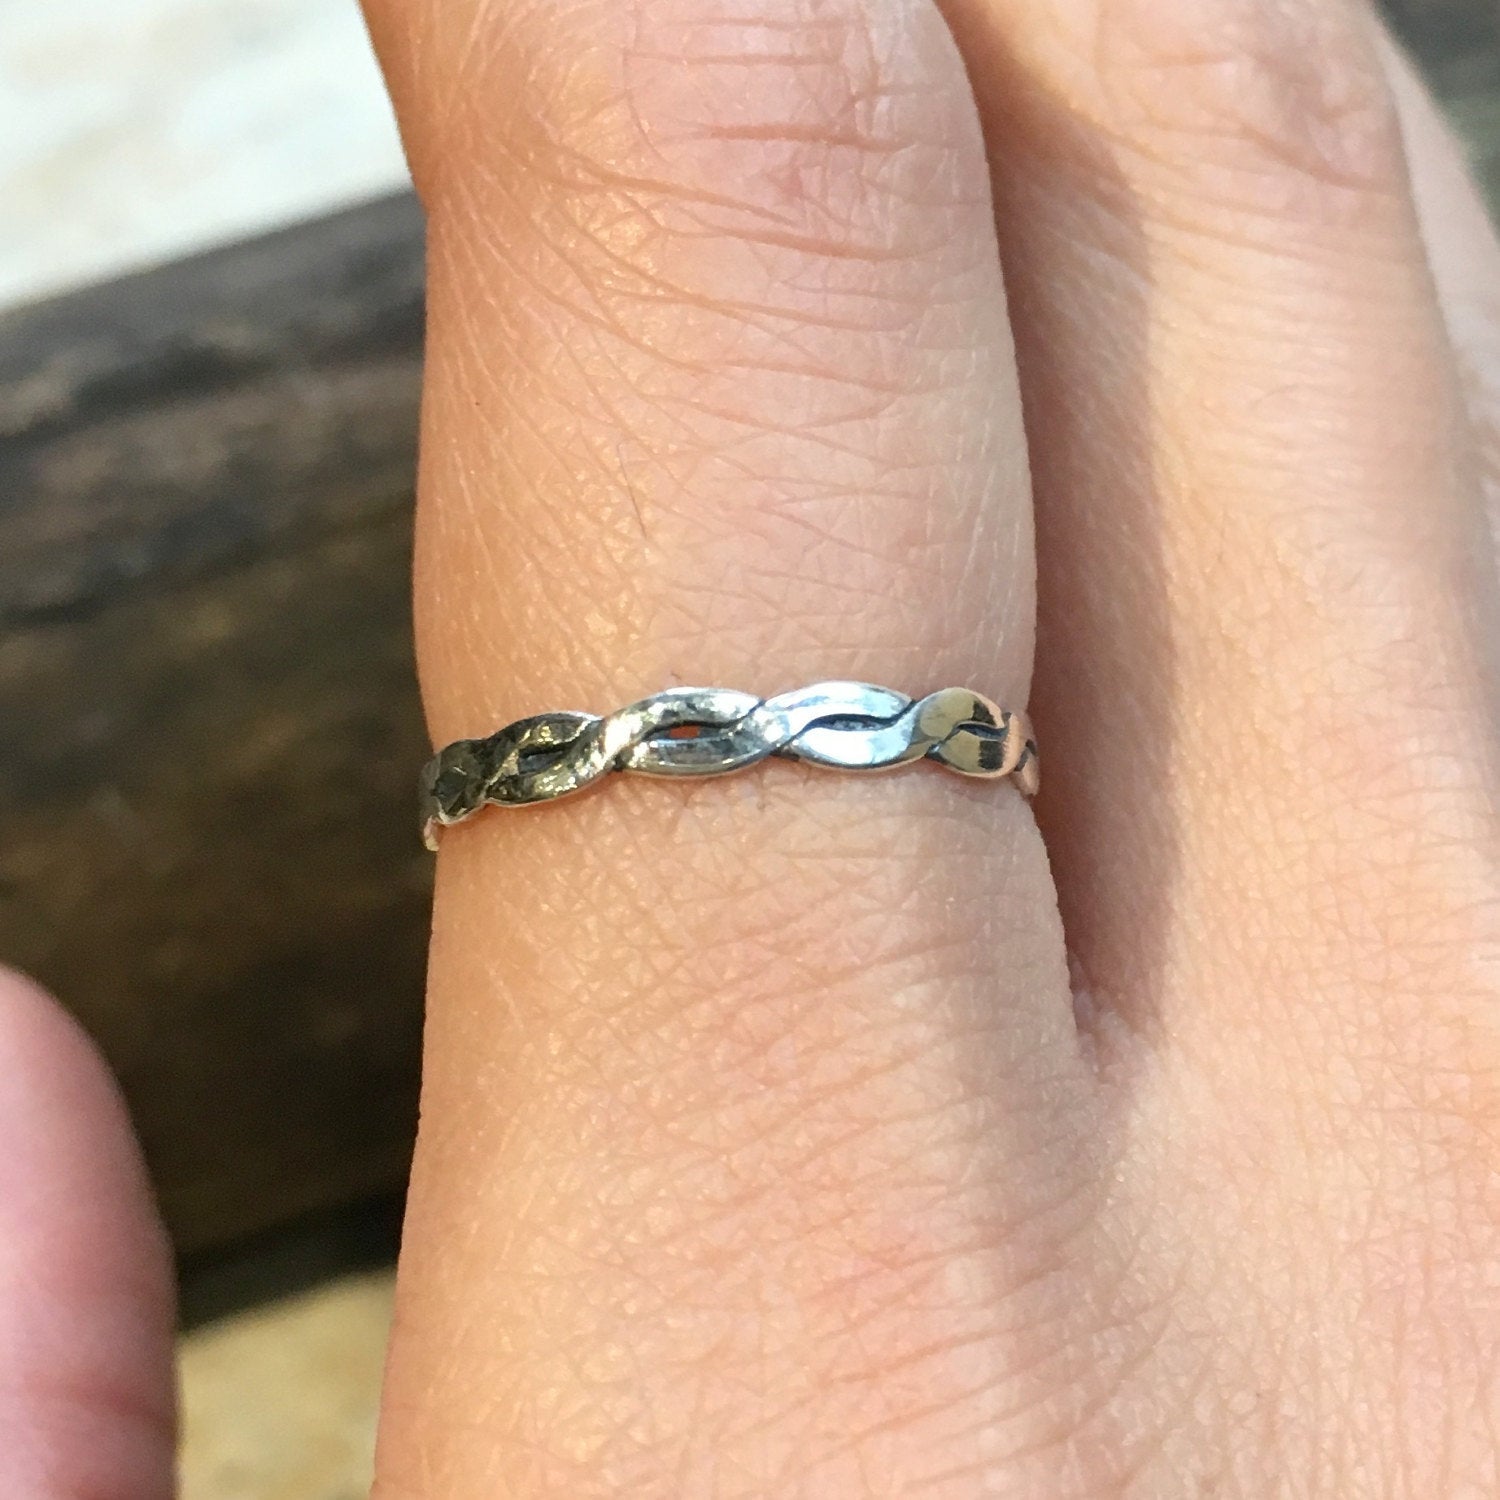 Minimal Ring, midi ring, dainty ring, Twisted Stacking Ring, Skinny Ring, Stackable Silver Ring, Organic Silver ring - Guilty Secret R2475